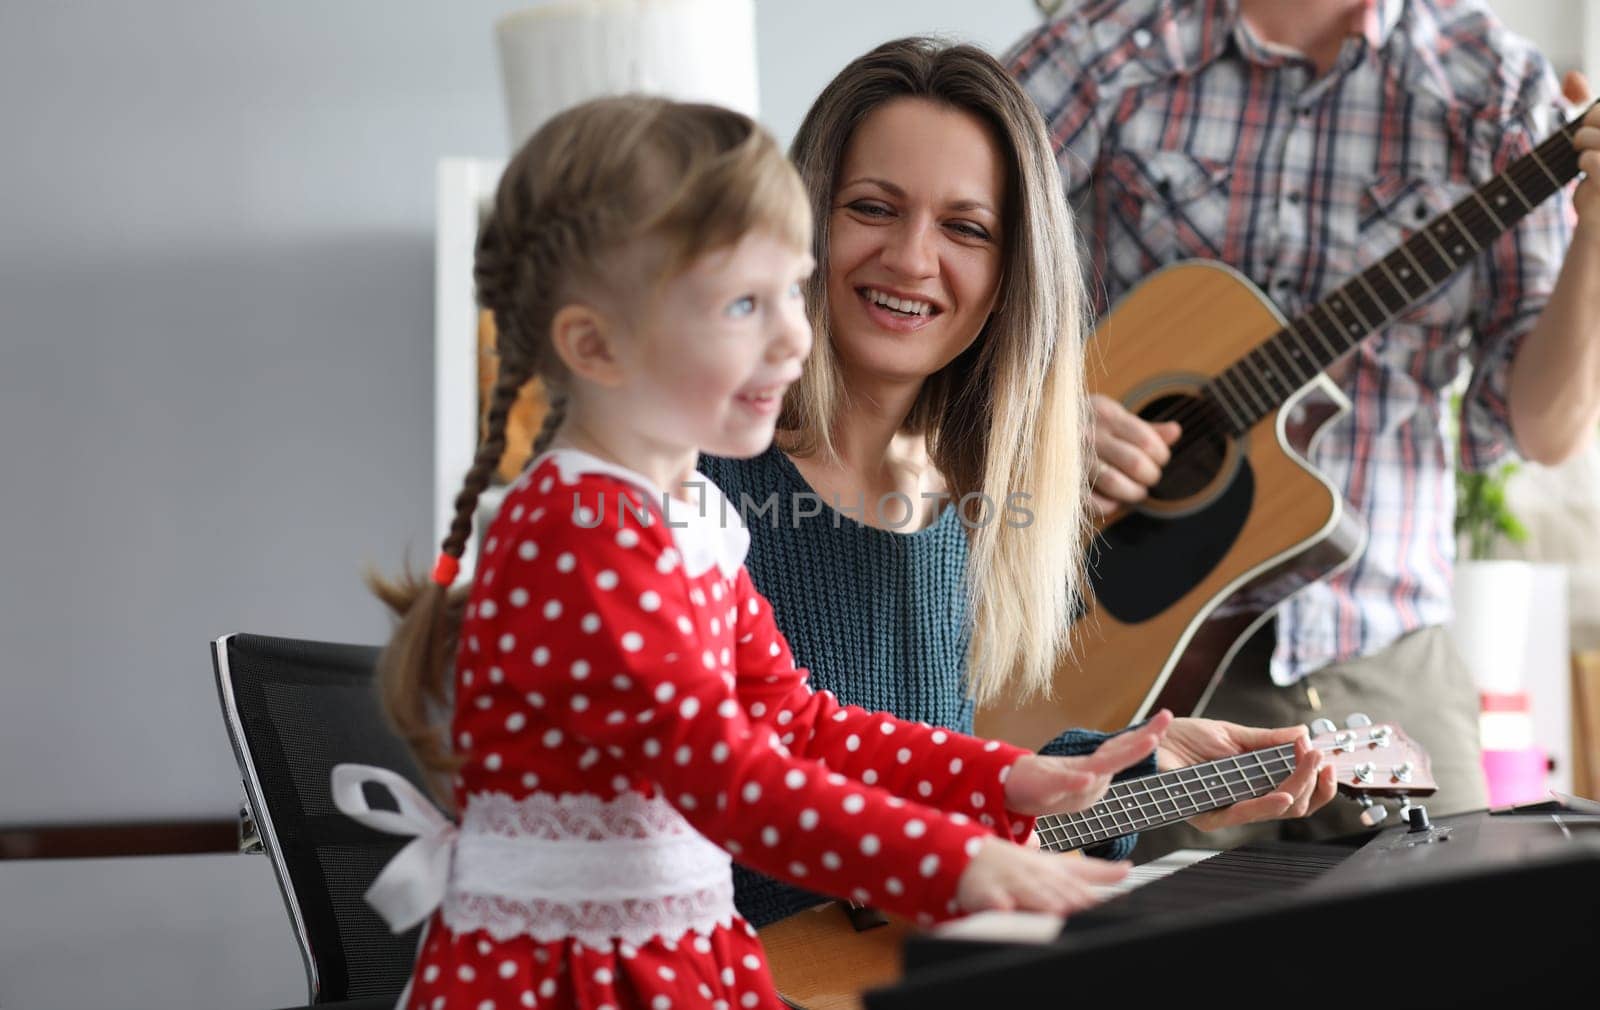 Parents play guitars, daughter on synthesizer by kuprevich